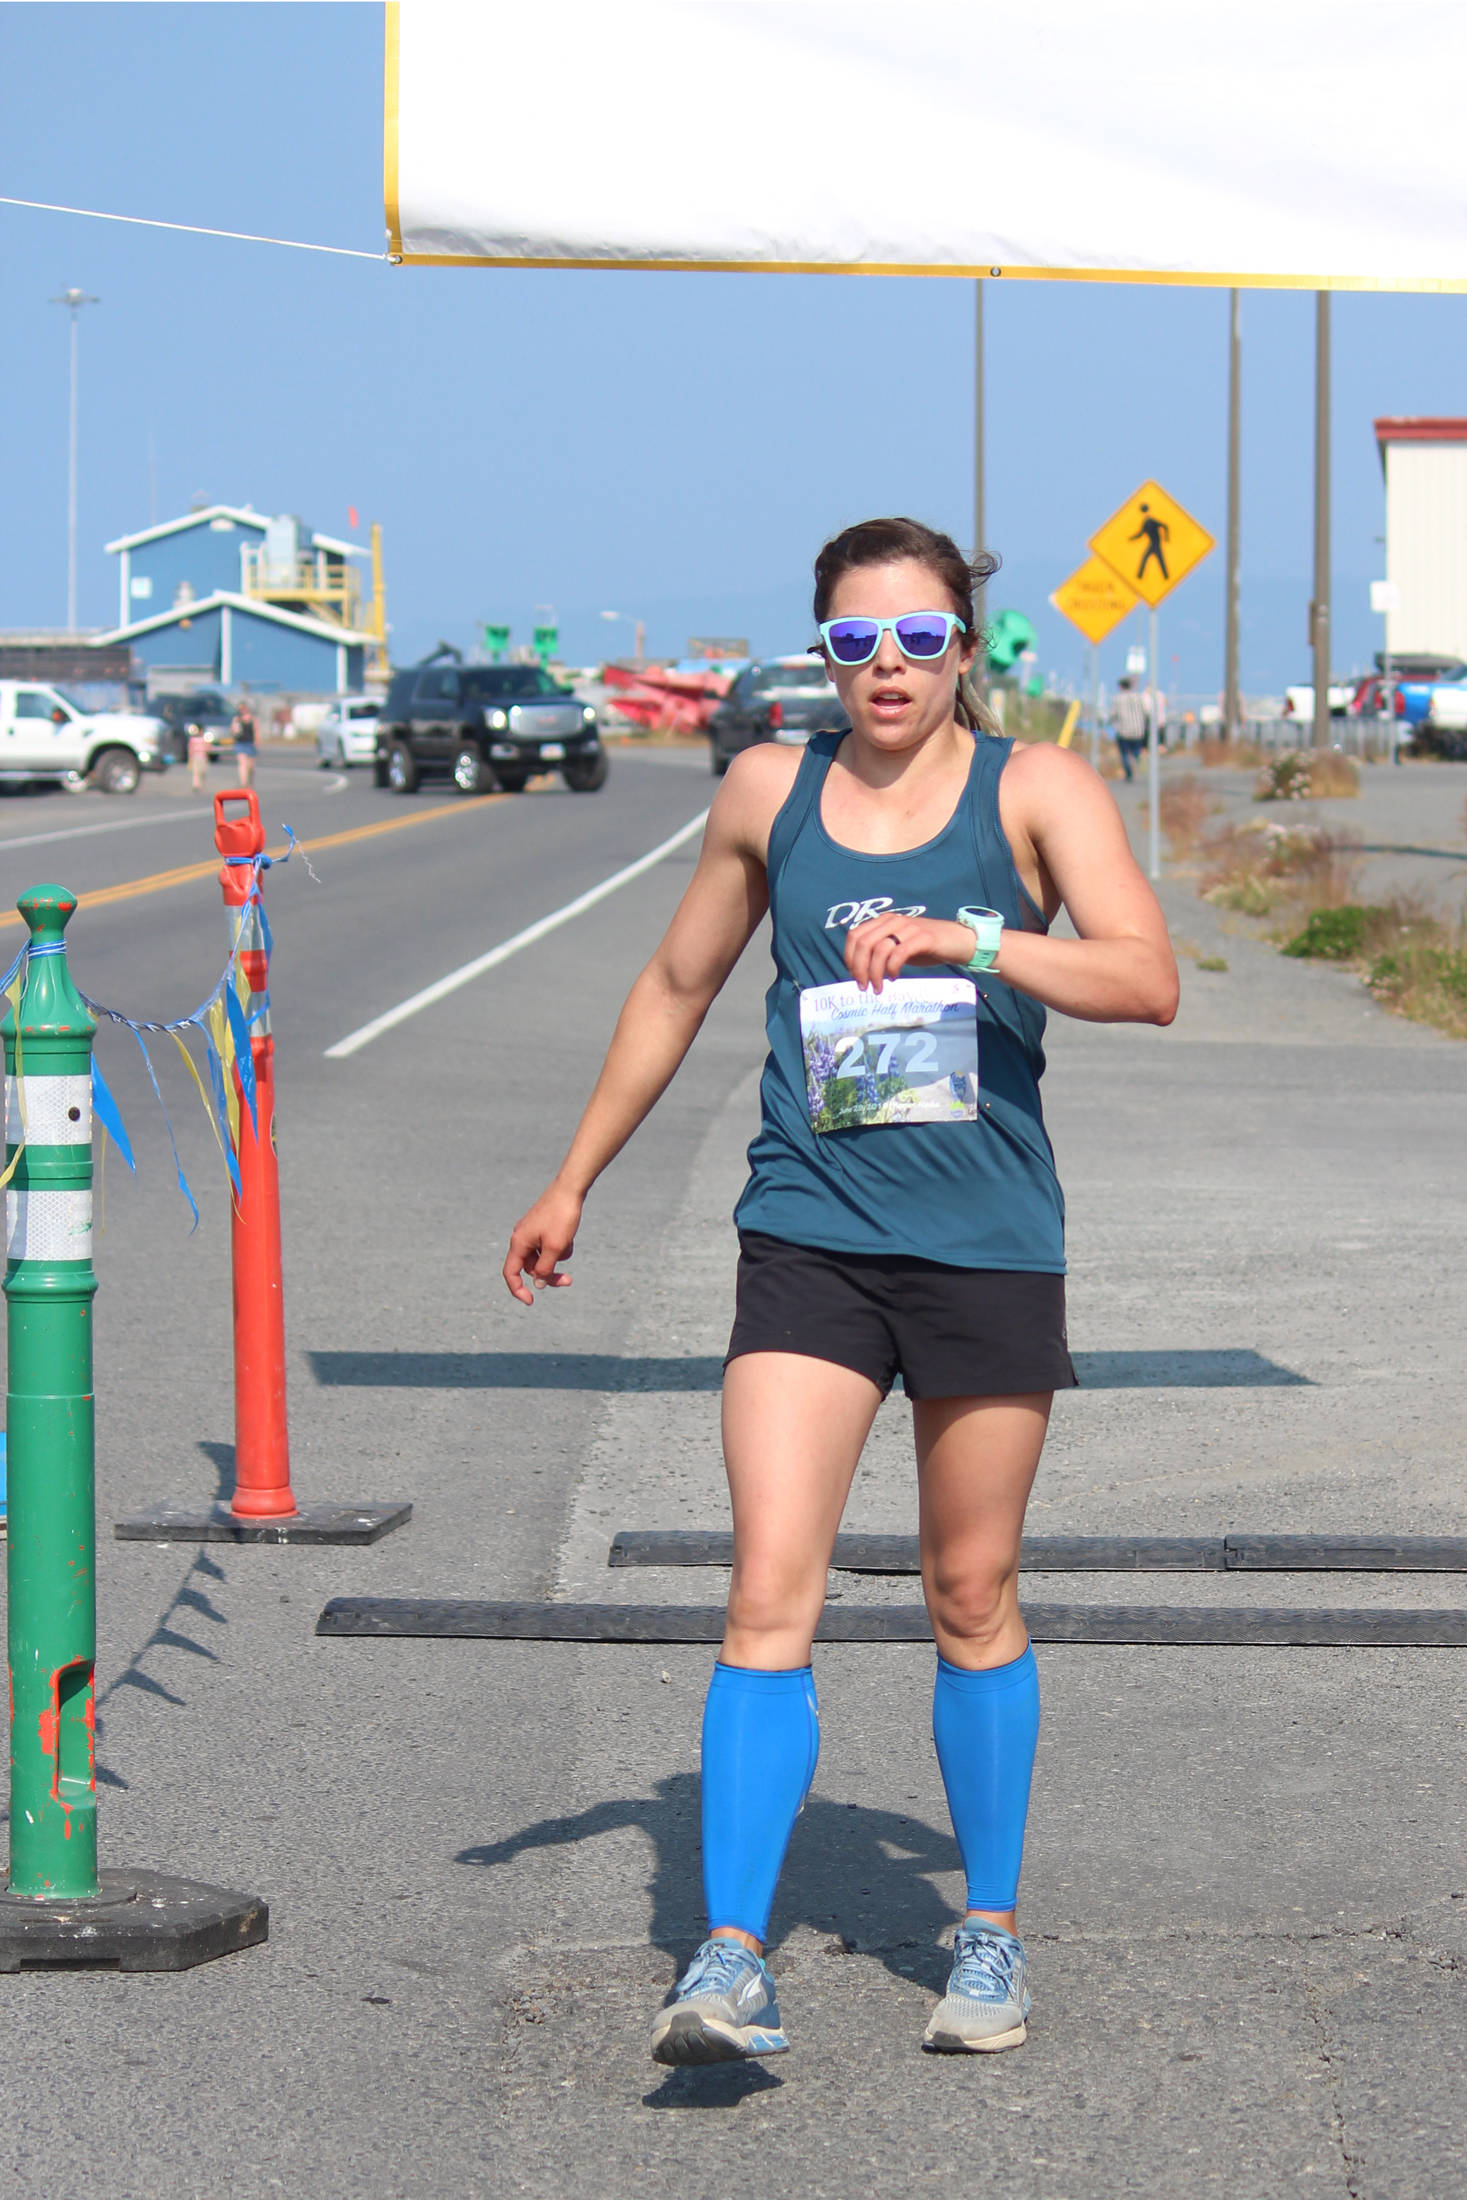 Kristyn Turney of Anchorage takes first place for the women in the Spit Run 10k to the Bay on Saturday, June 29, 2019 in Homer, Alaska. (Photo by Megan Pacer/Homer News)